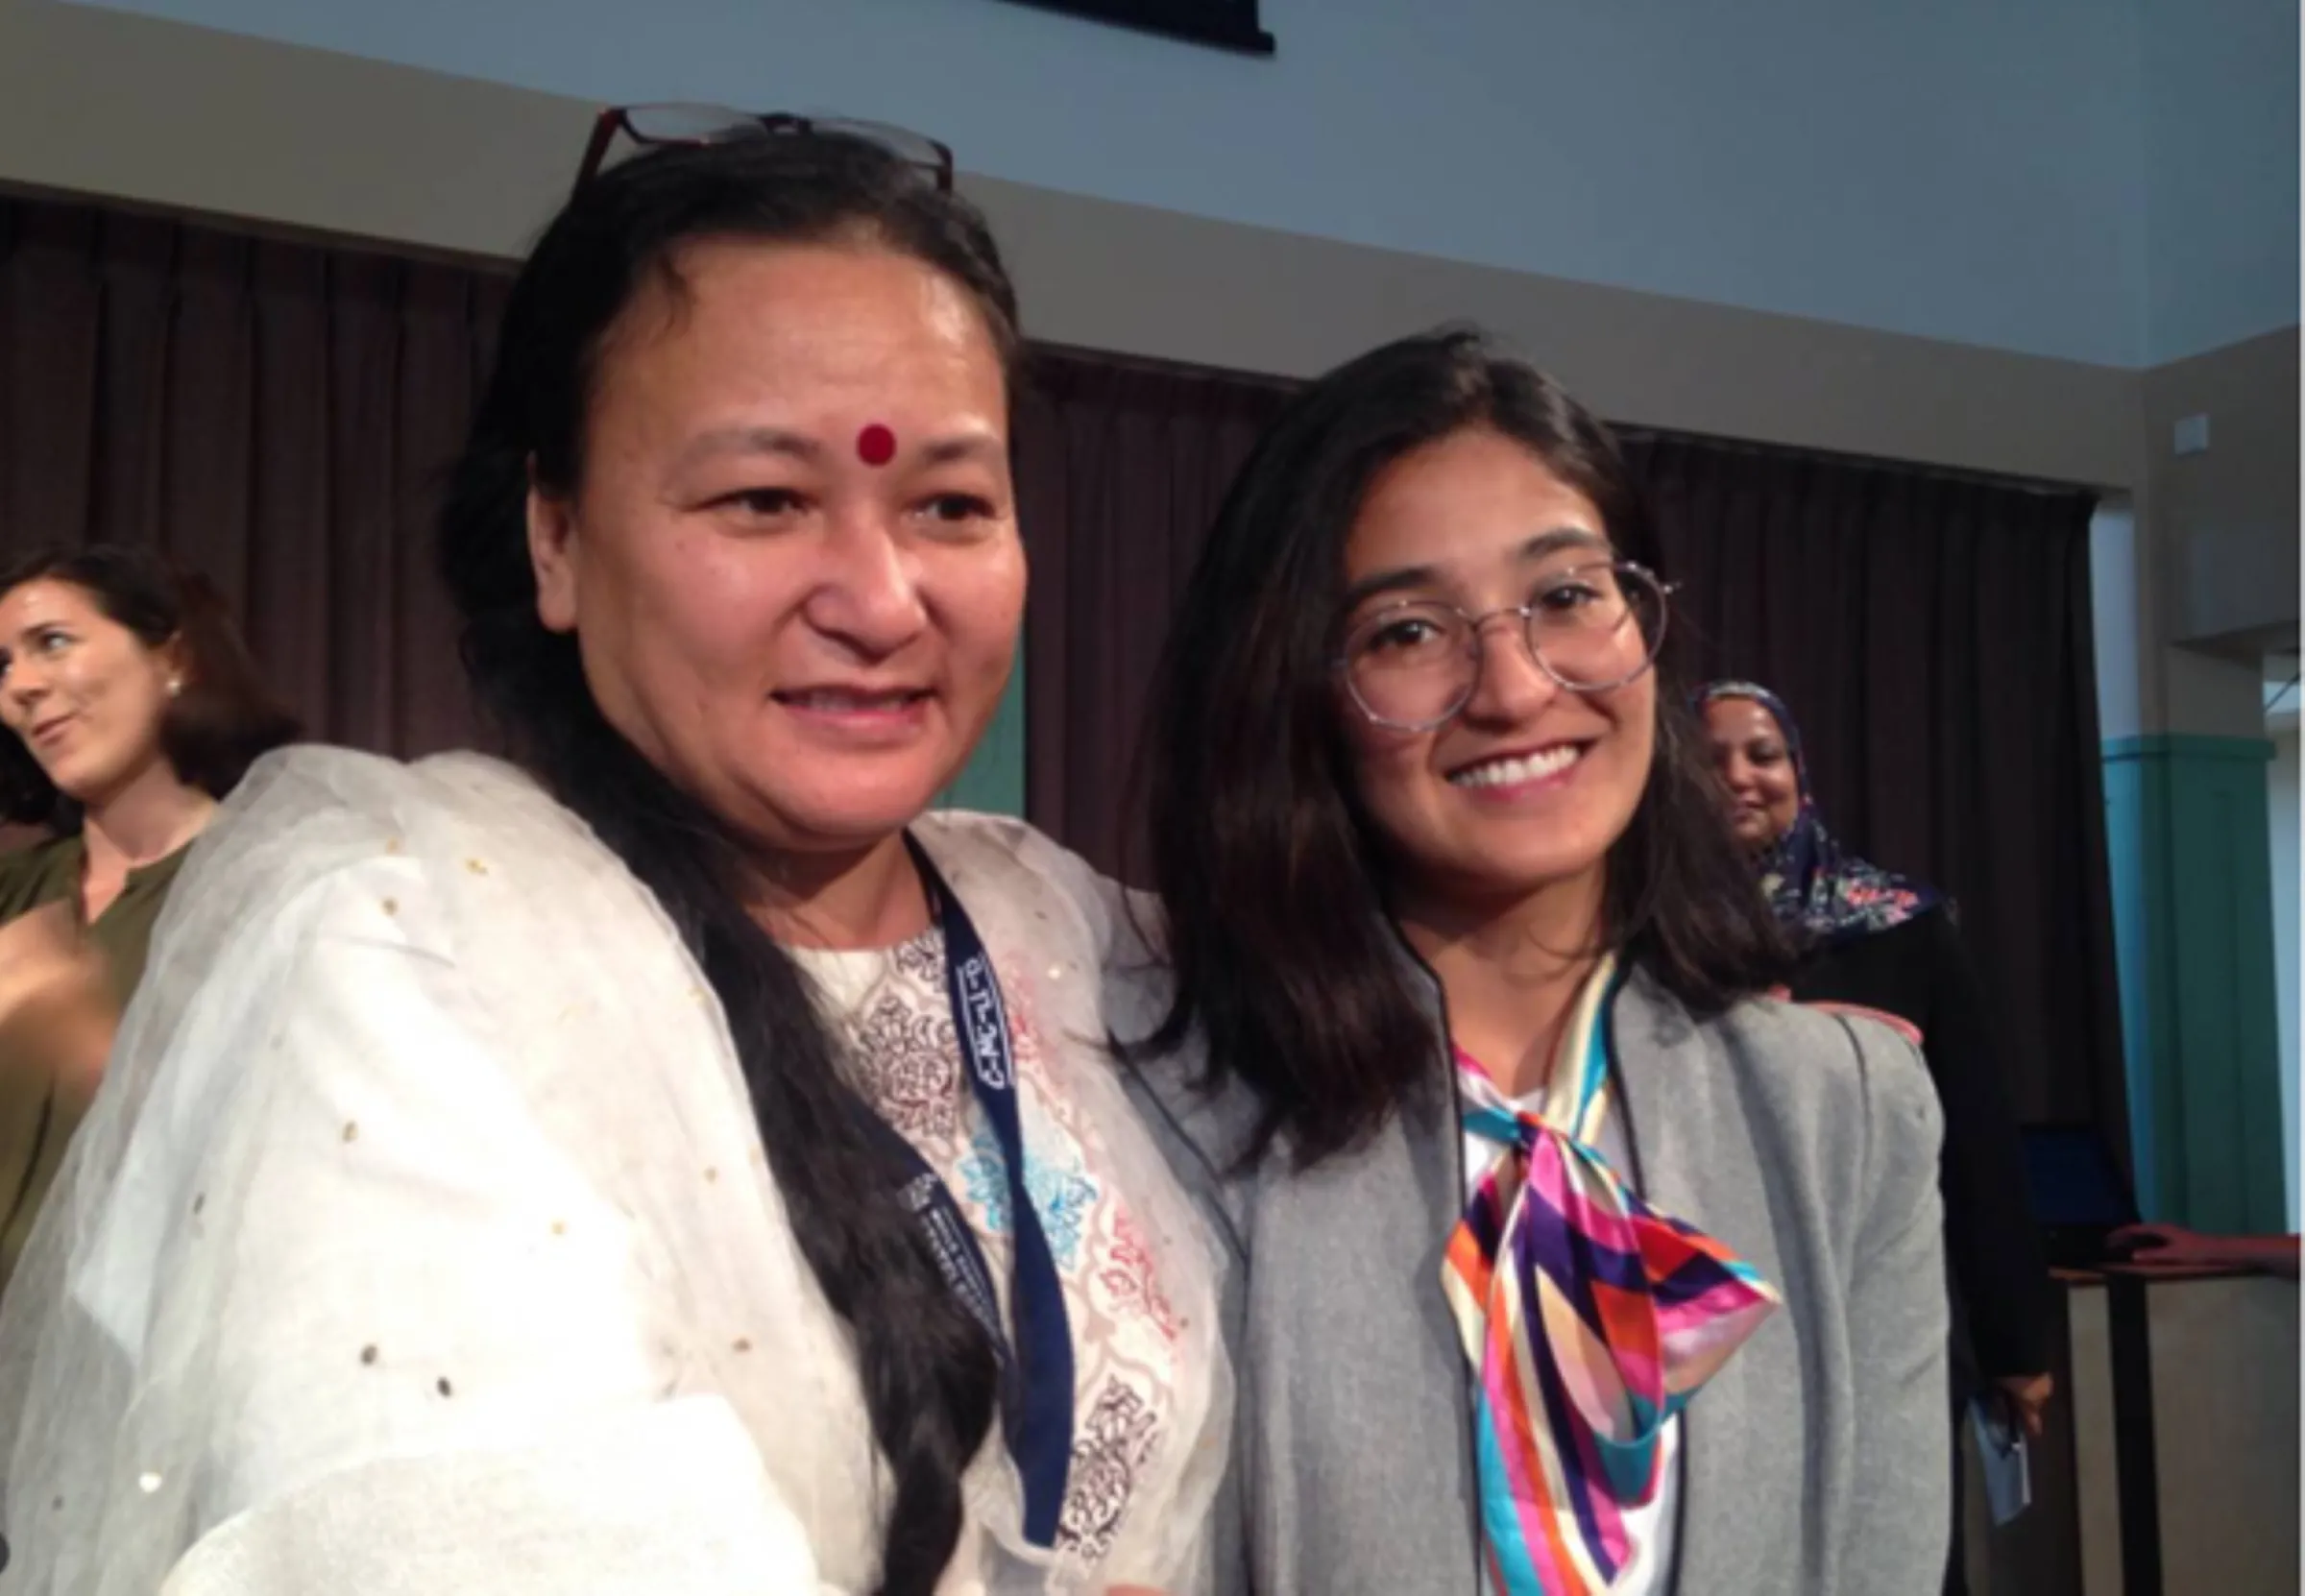 Neha Gurung, who is campaigning to end discriminatory nationality laws in Nepal, is pictured with her mother Deepti Gurung at the 2019 World Conference on Statelessness in The Hague. Thomson Reuters Foundation/Emma Batha